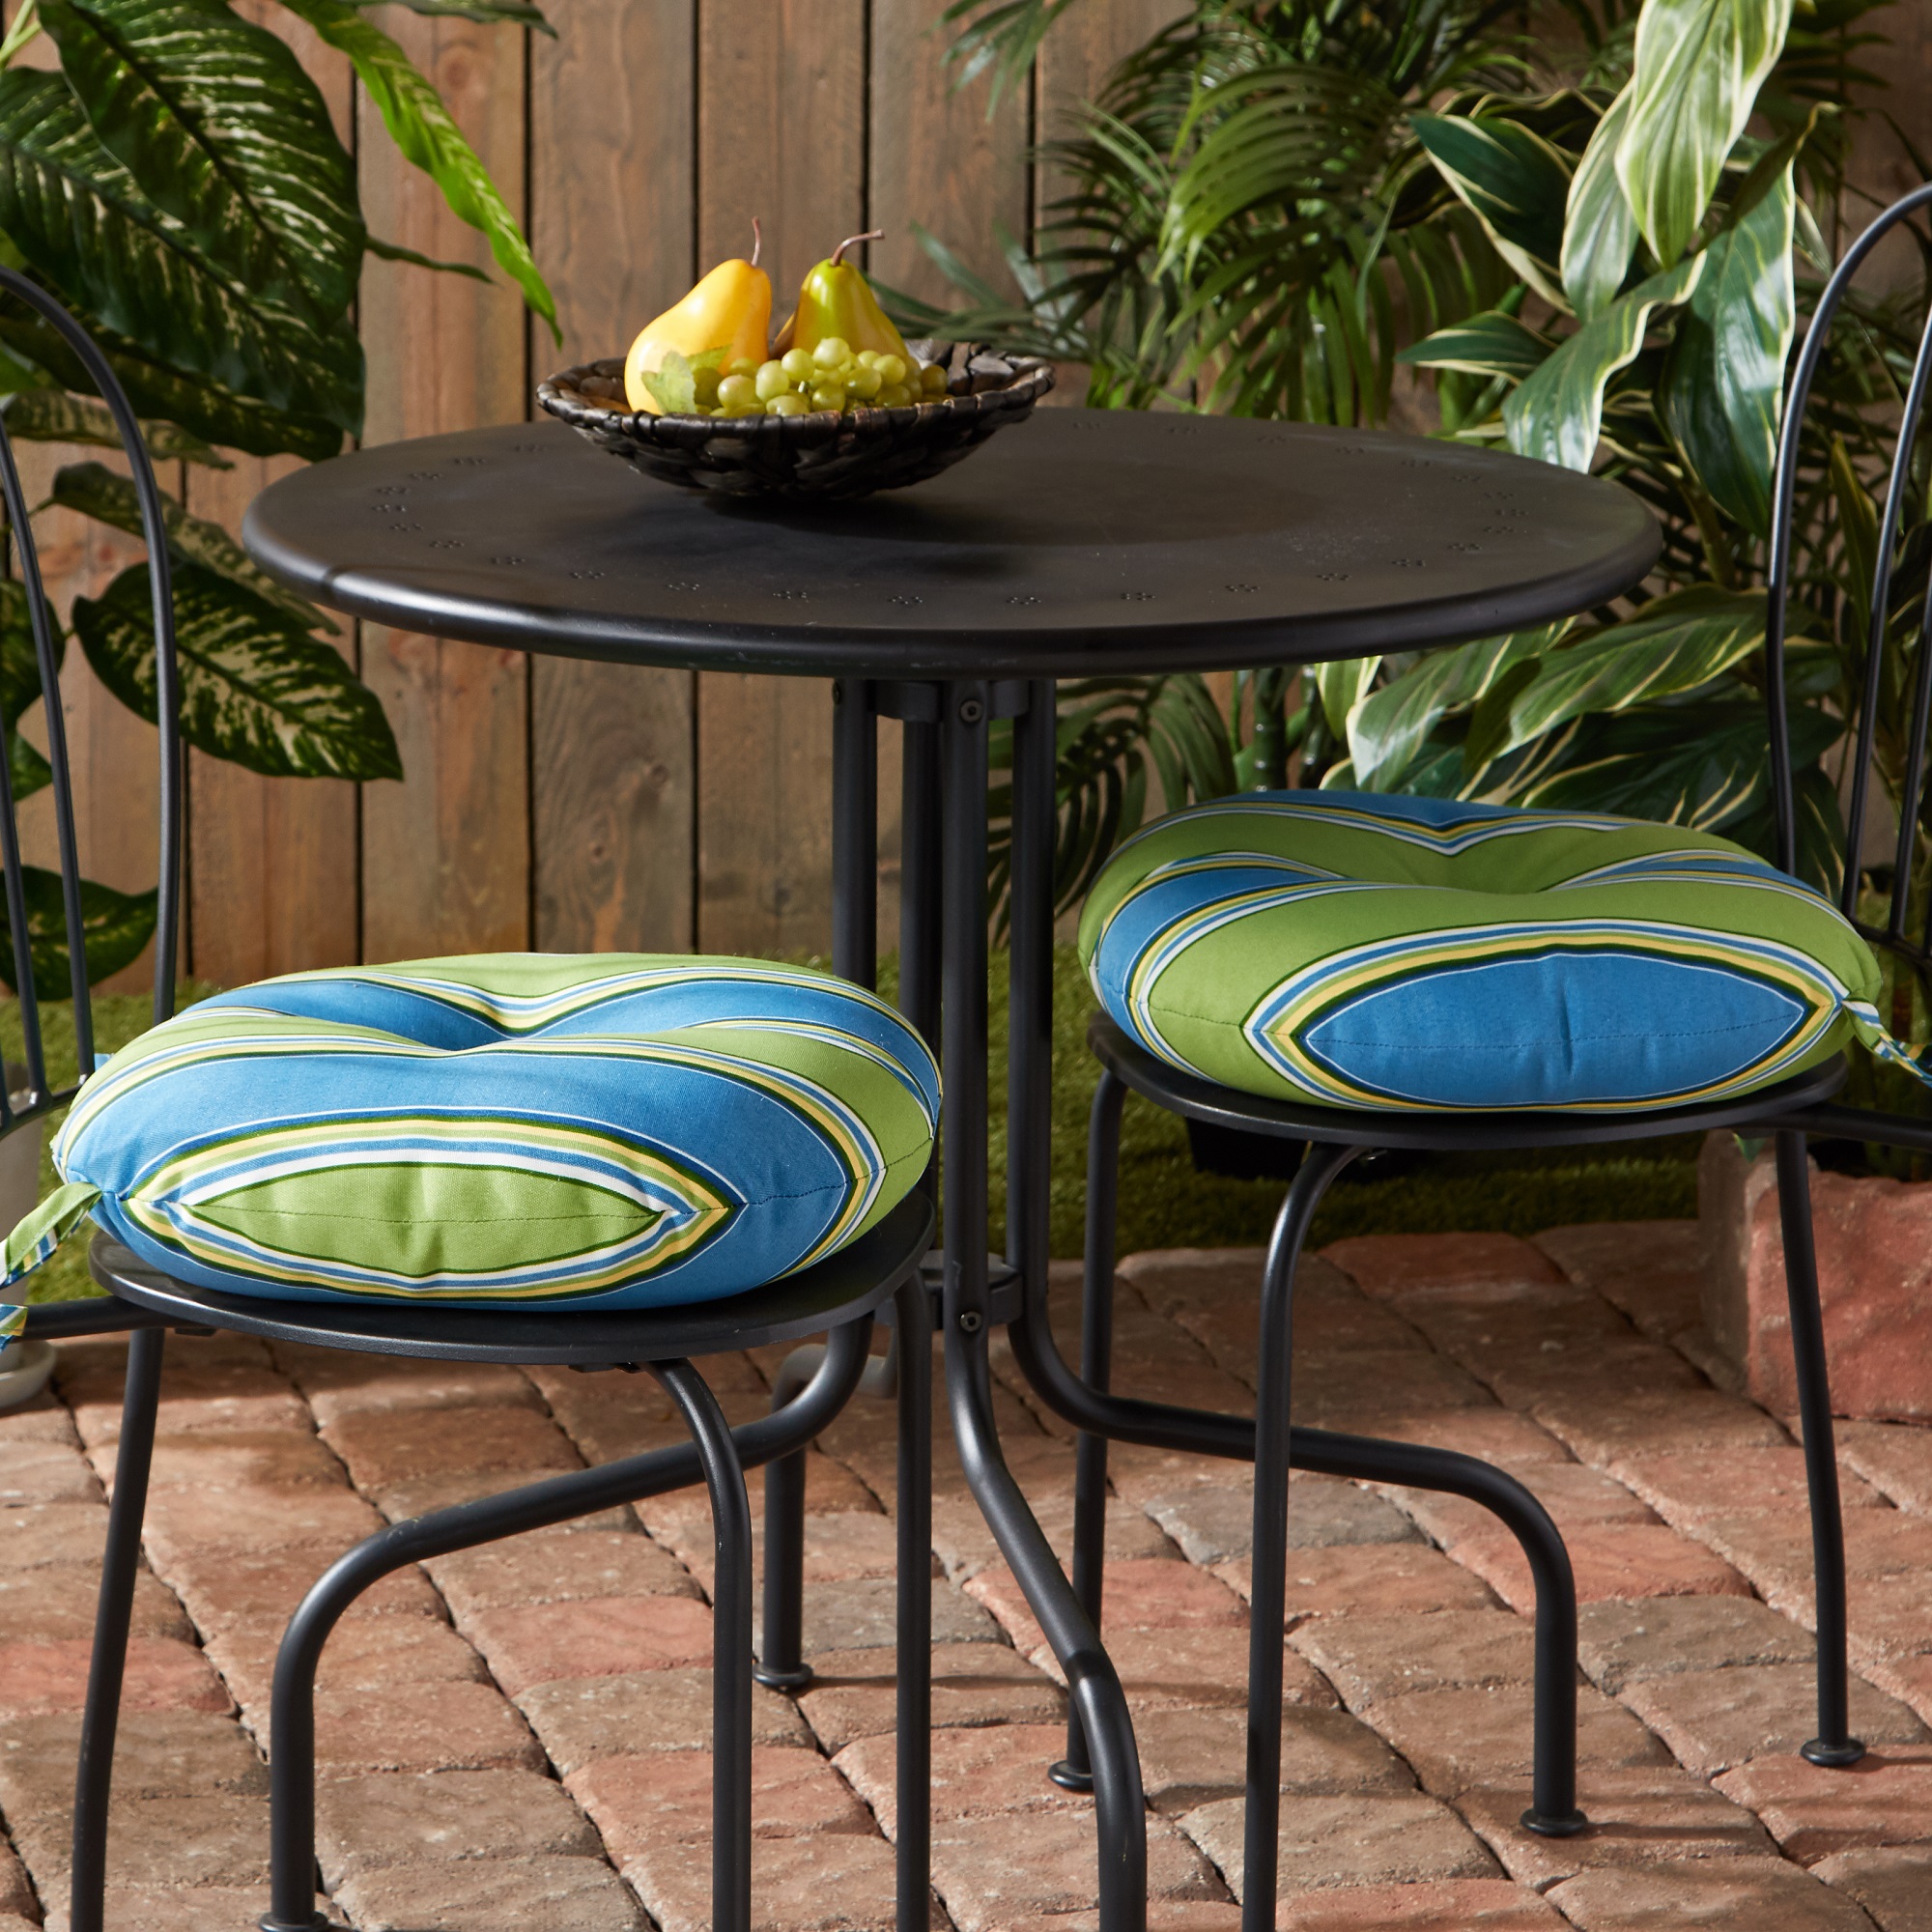 Greendale Home Fashions Cayman Stripe 15 in. Round Outdoor Reversible Bistro Seat Cushion (Set of 2) - image 3 of 7